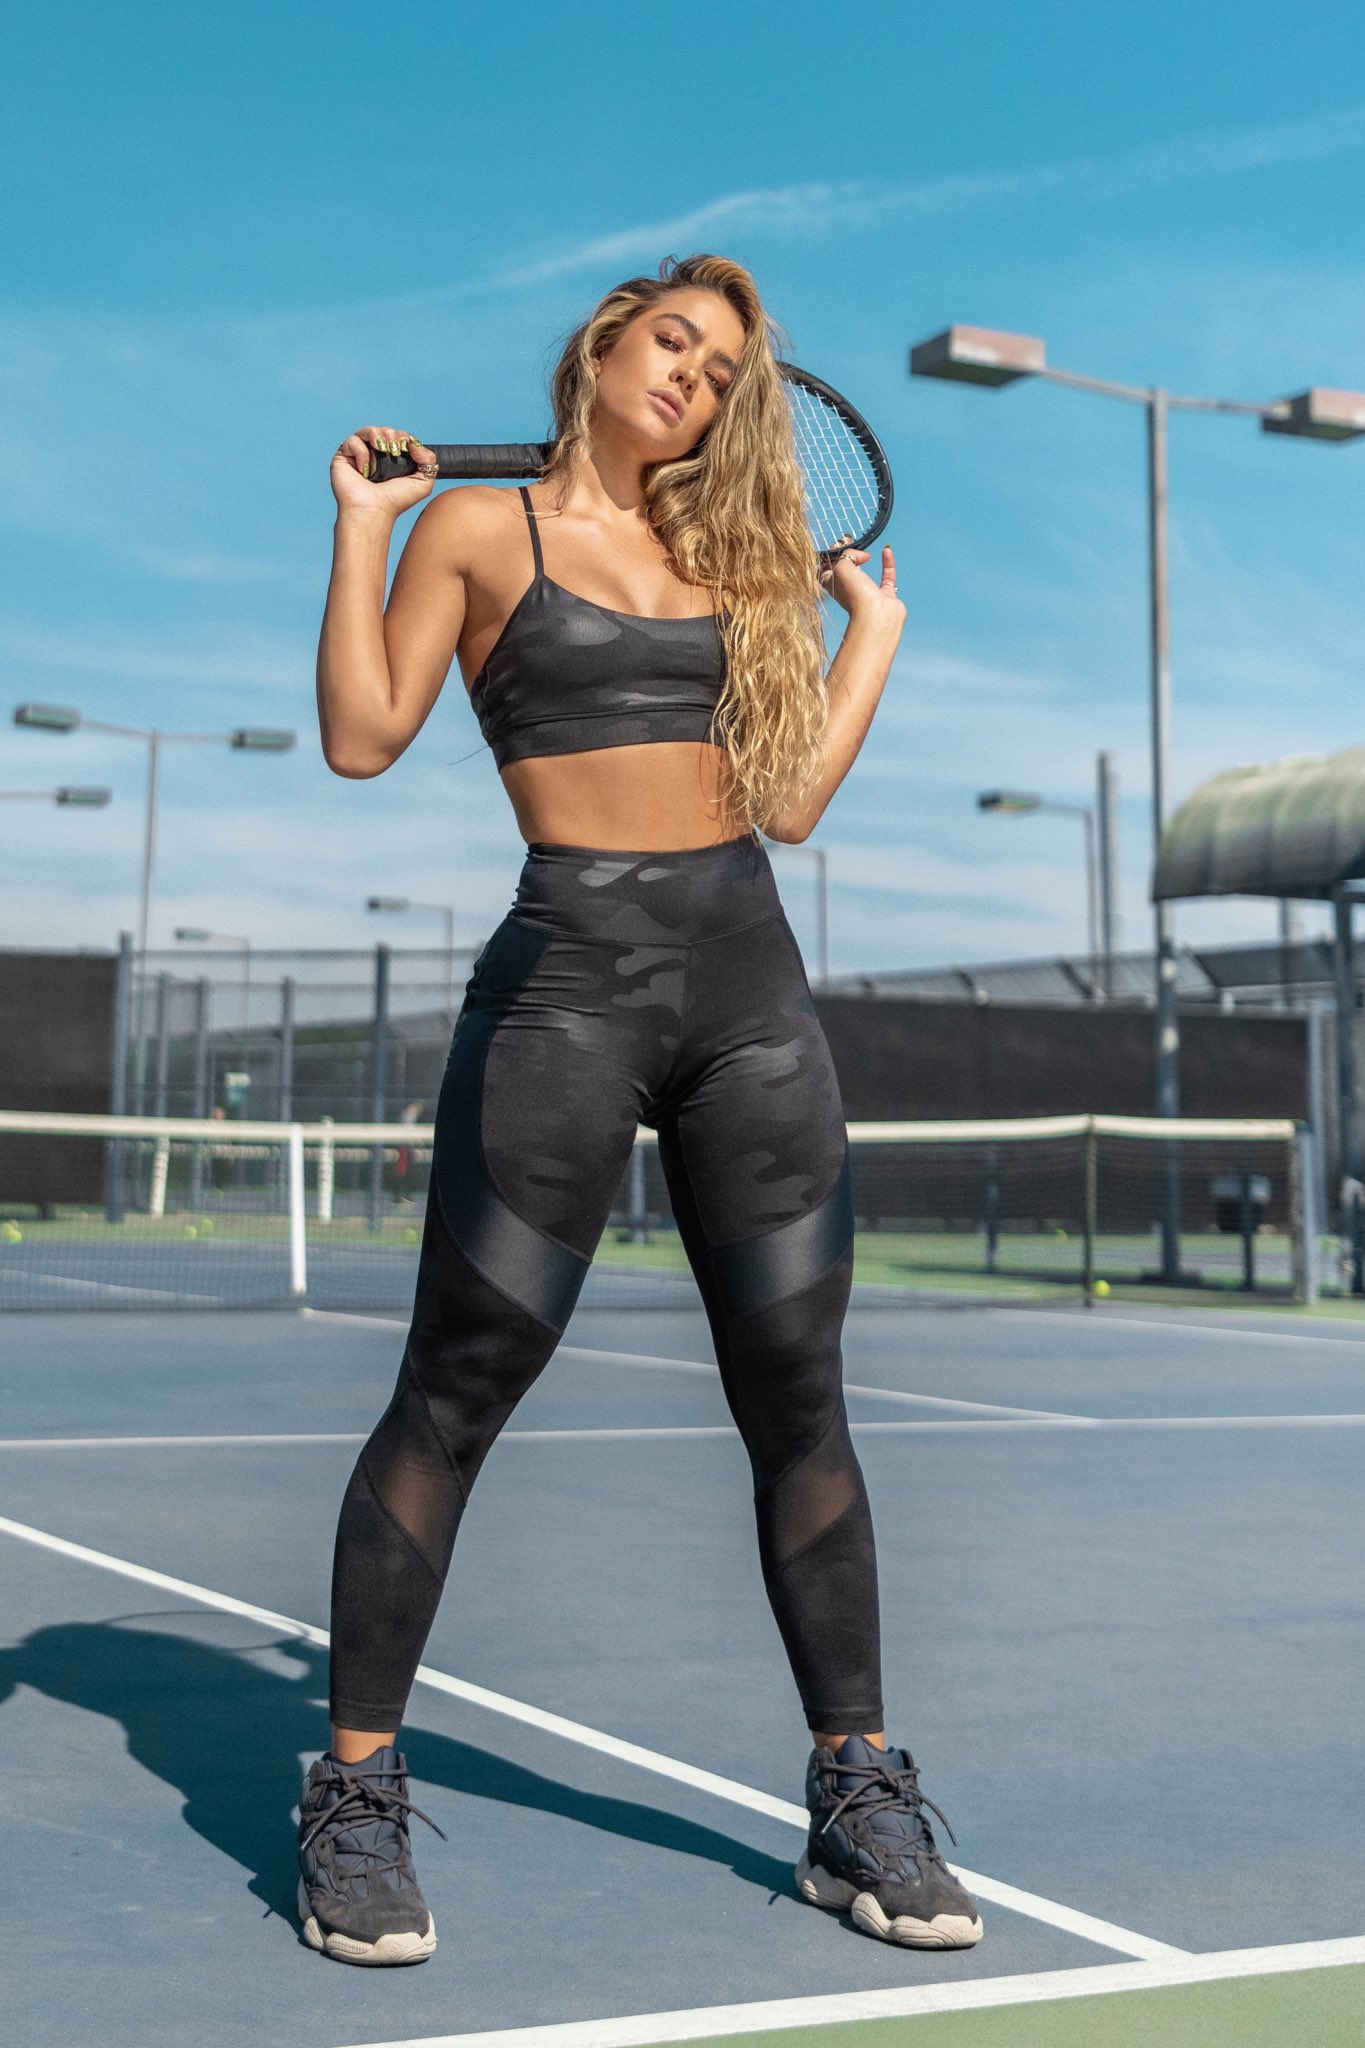 anthony brod add sommer ray thick photo